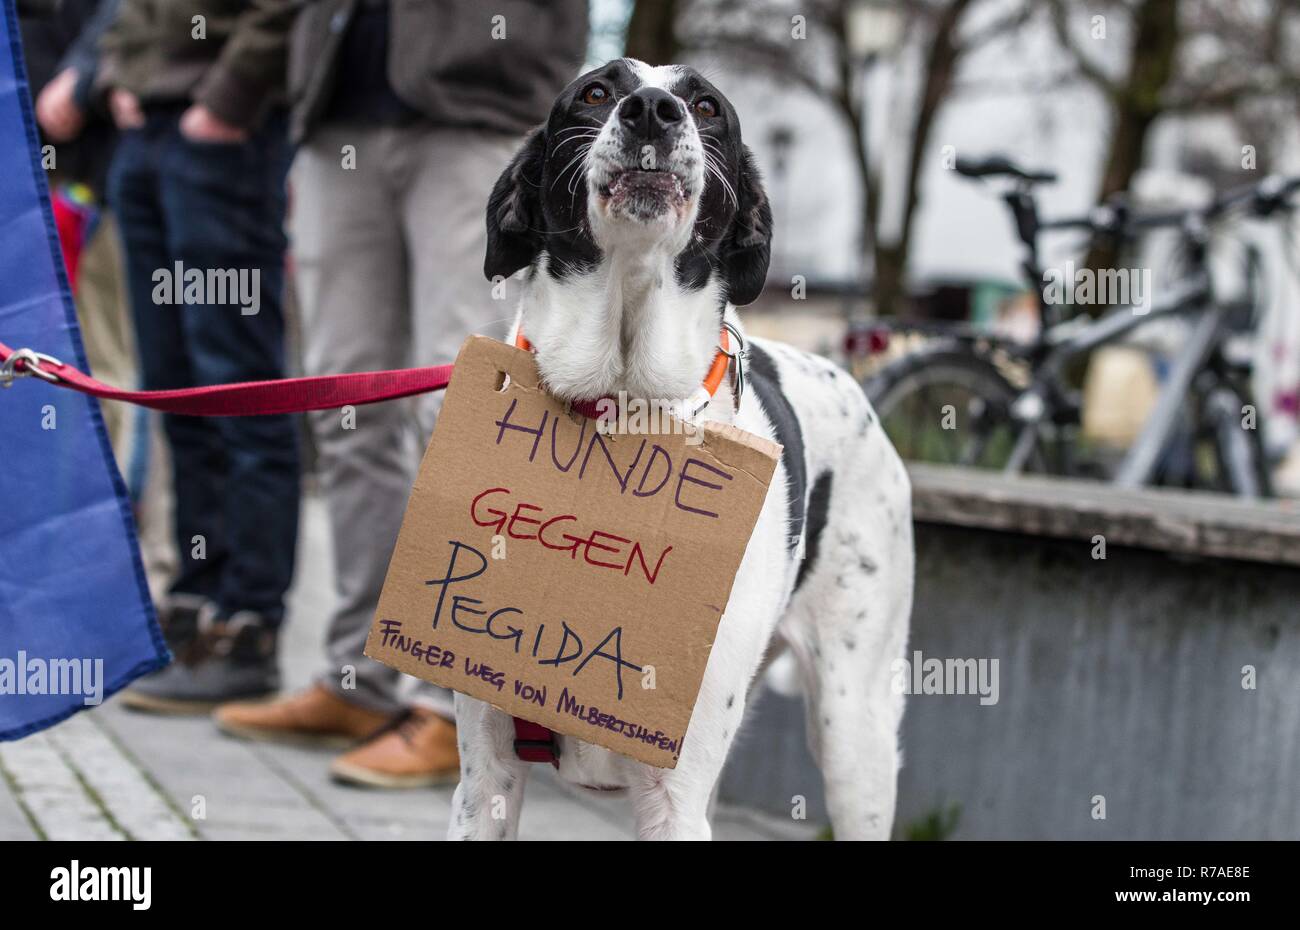 Munich, Bavaria, Germany. 8th December, 2018. ''Dogs against Pegida.Keep fingers away from Milberthofen''.Pegida Dresden in Munich, the self-proclaimed original Pegida, organized a rally in the city's Milberthofen district in front of the Dankeskirche (Thanks Church) of Munich. Headed by Michael Stuerzenberger, the group rallied against the United Nations Migration Pact. Speaking with Stuerzenberger was Gerno Credit: Credit: ZUMA Press, Inc./Alamy Live News Stock Photo